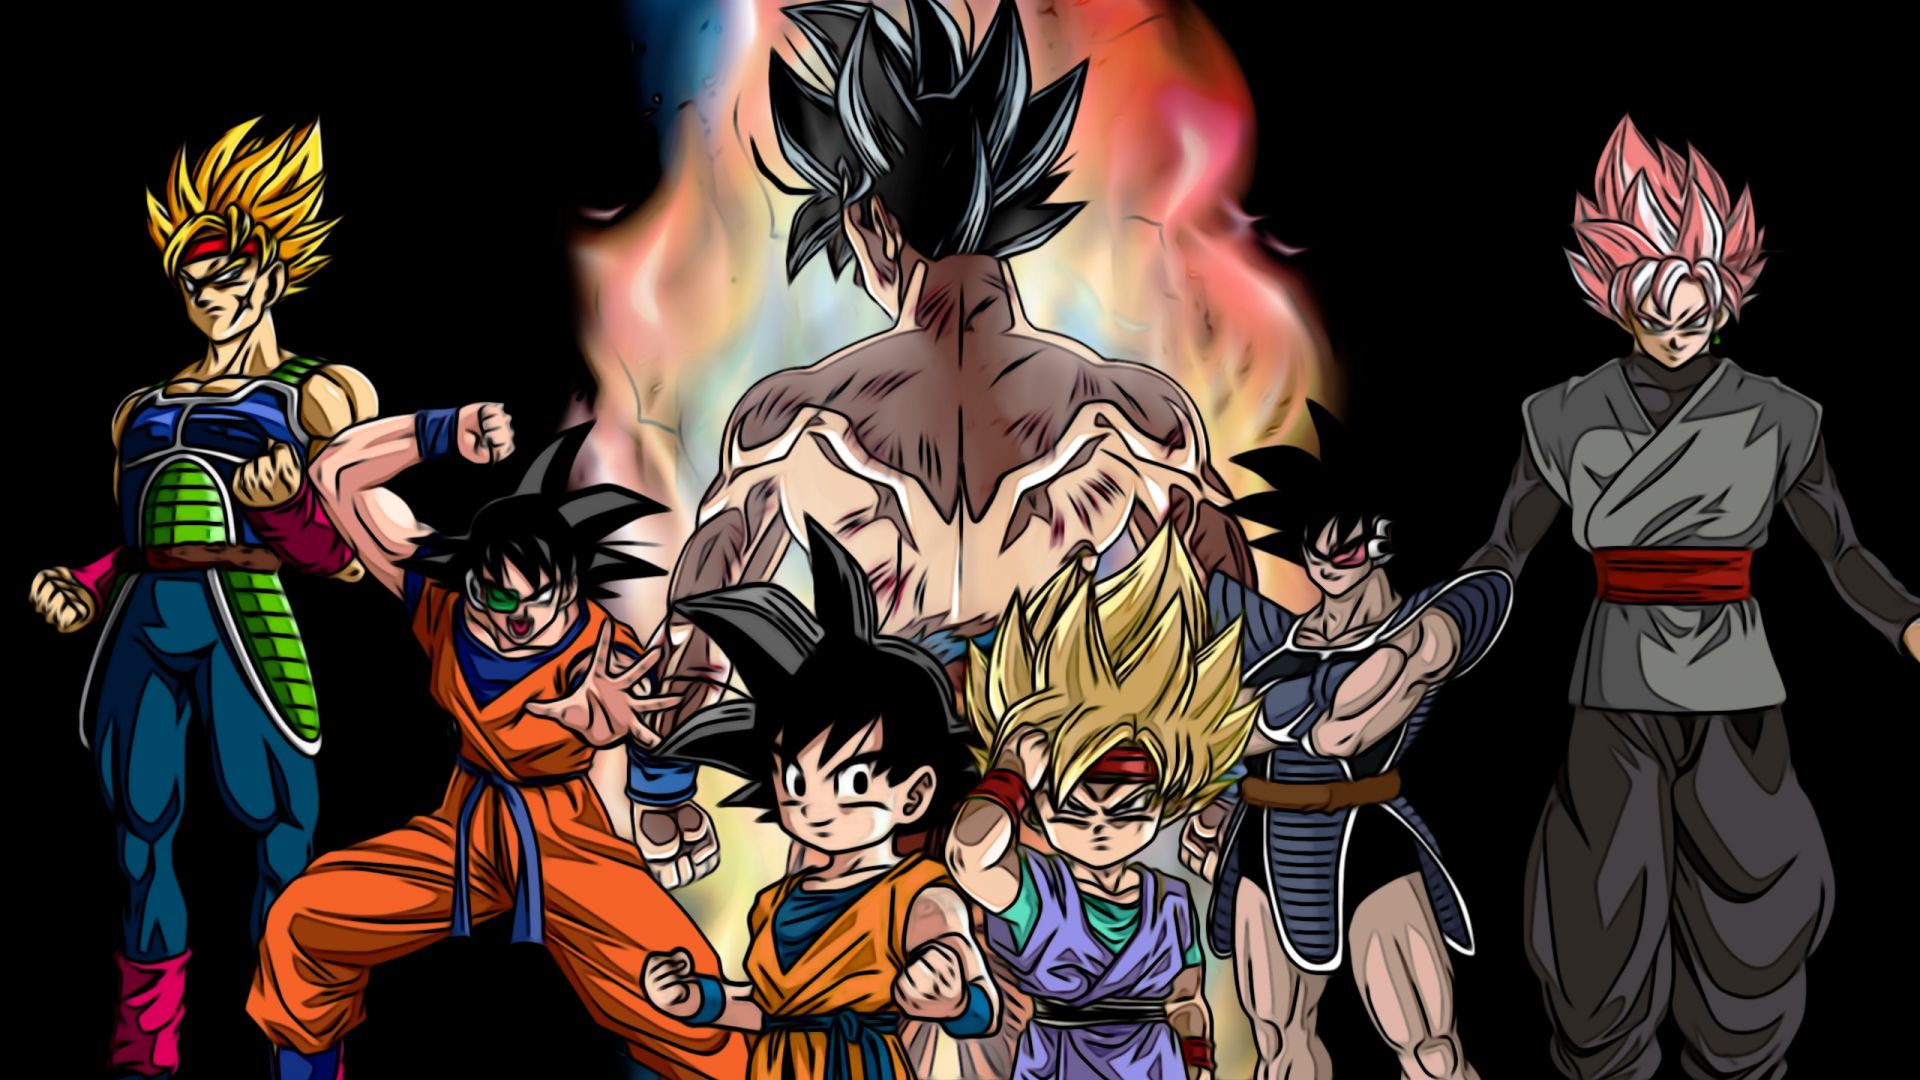 Desktop wallpaper dragon ball characters anime art hd image picture background f